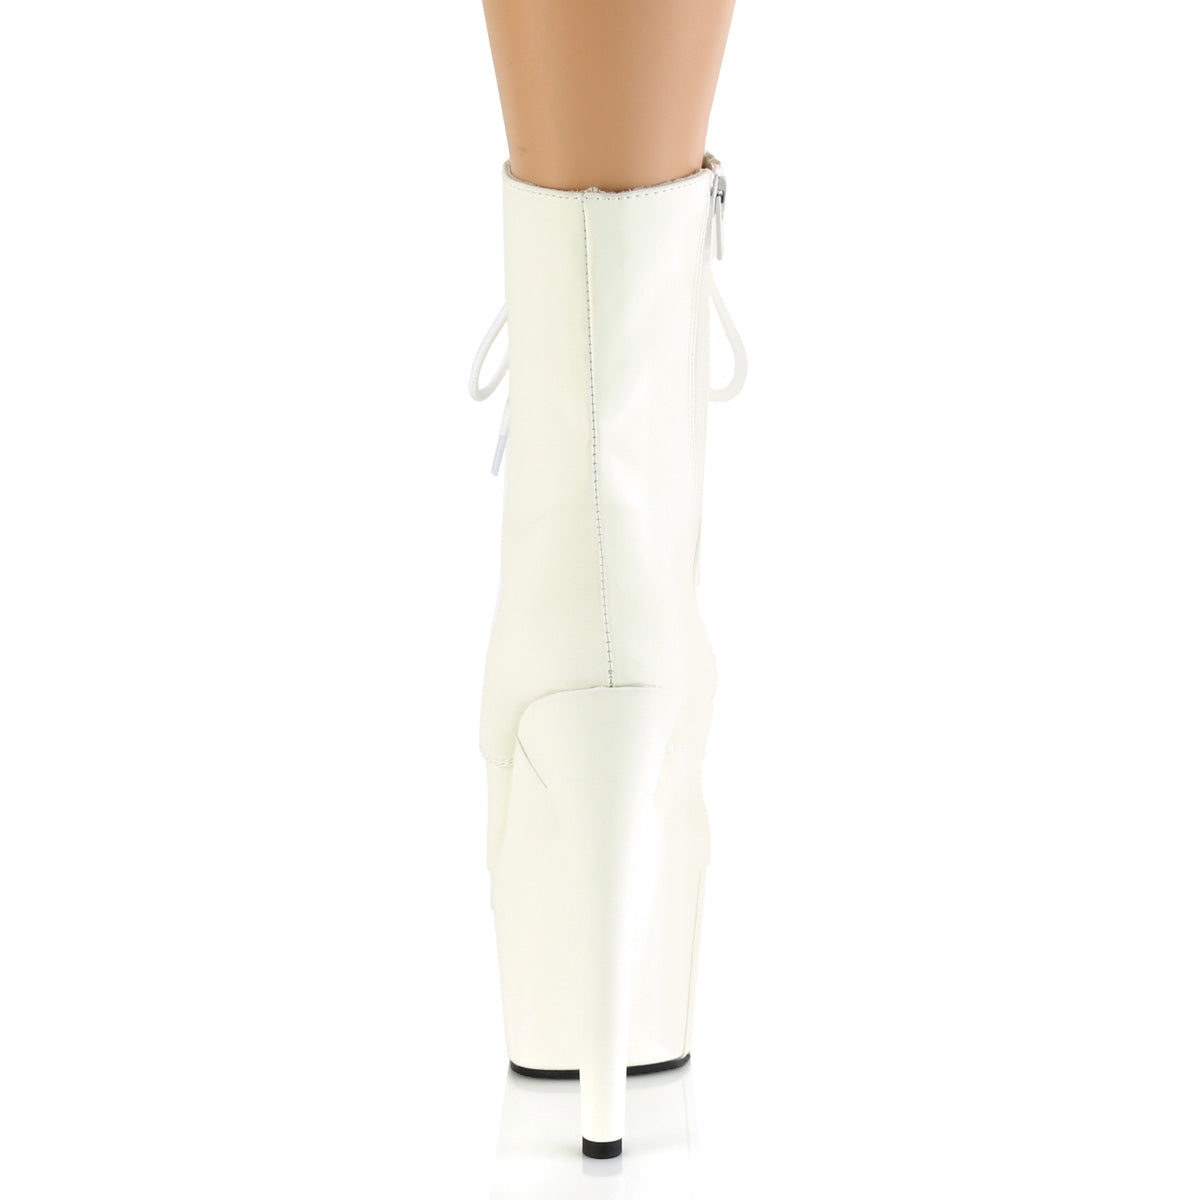 ADORE-1020GD Pleaser White Glow F.Leather/White Glow F.Leather Platform Shoes [Exotic Dance Ankle Boots]